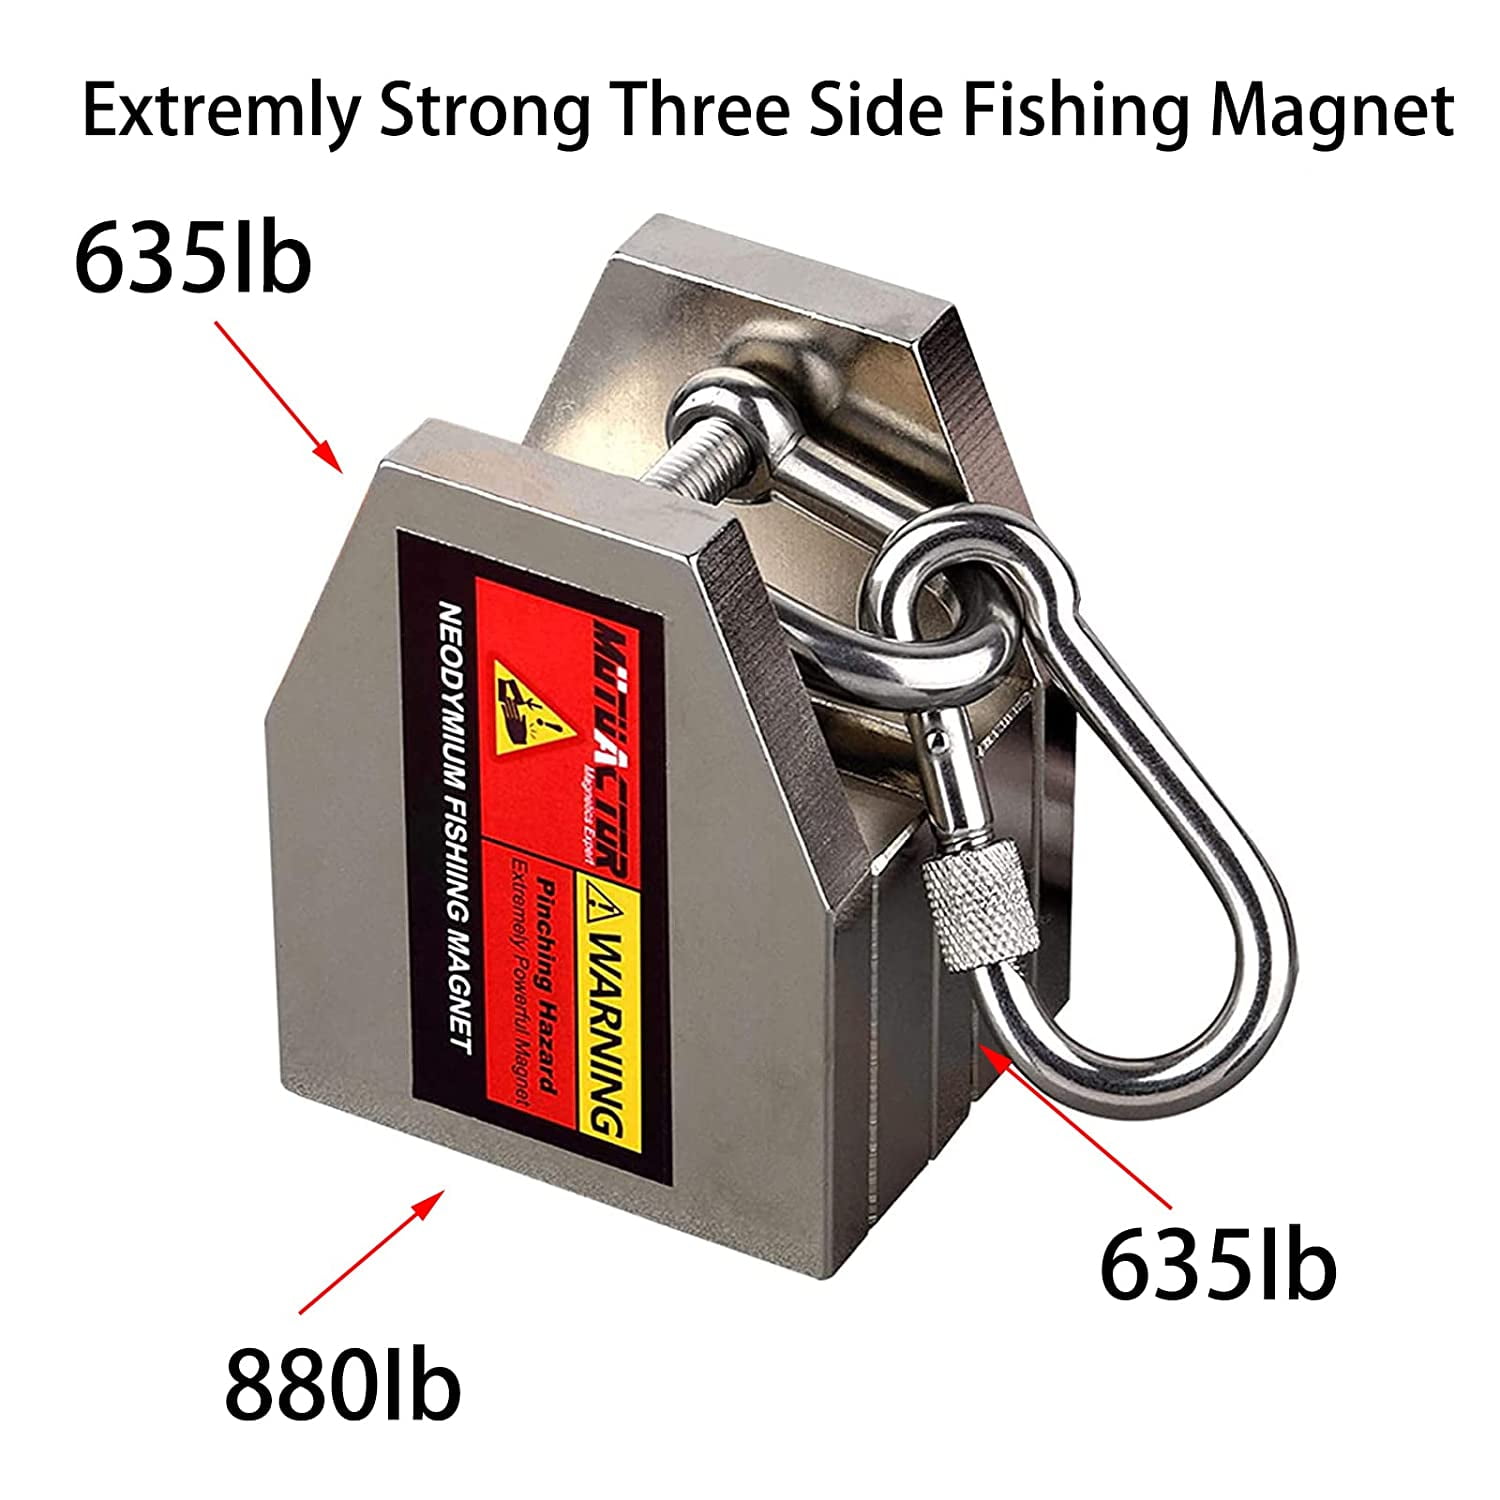 MUTUACTOR 2150LB Fishing Magnet Kit Three Sides Long Magnetic Distance  Extremly Strong, Neodymium Fishing Magnet for Recovery and Salvage Fishing